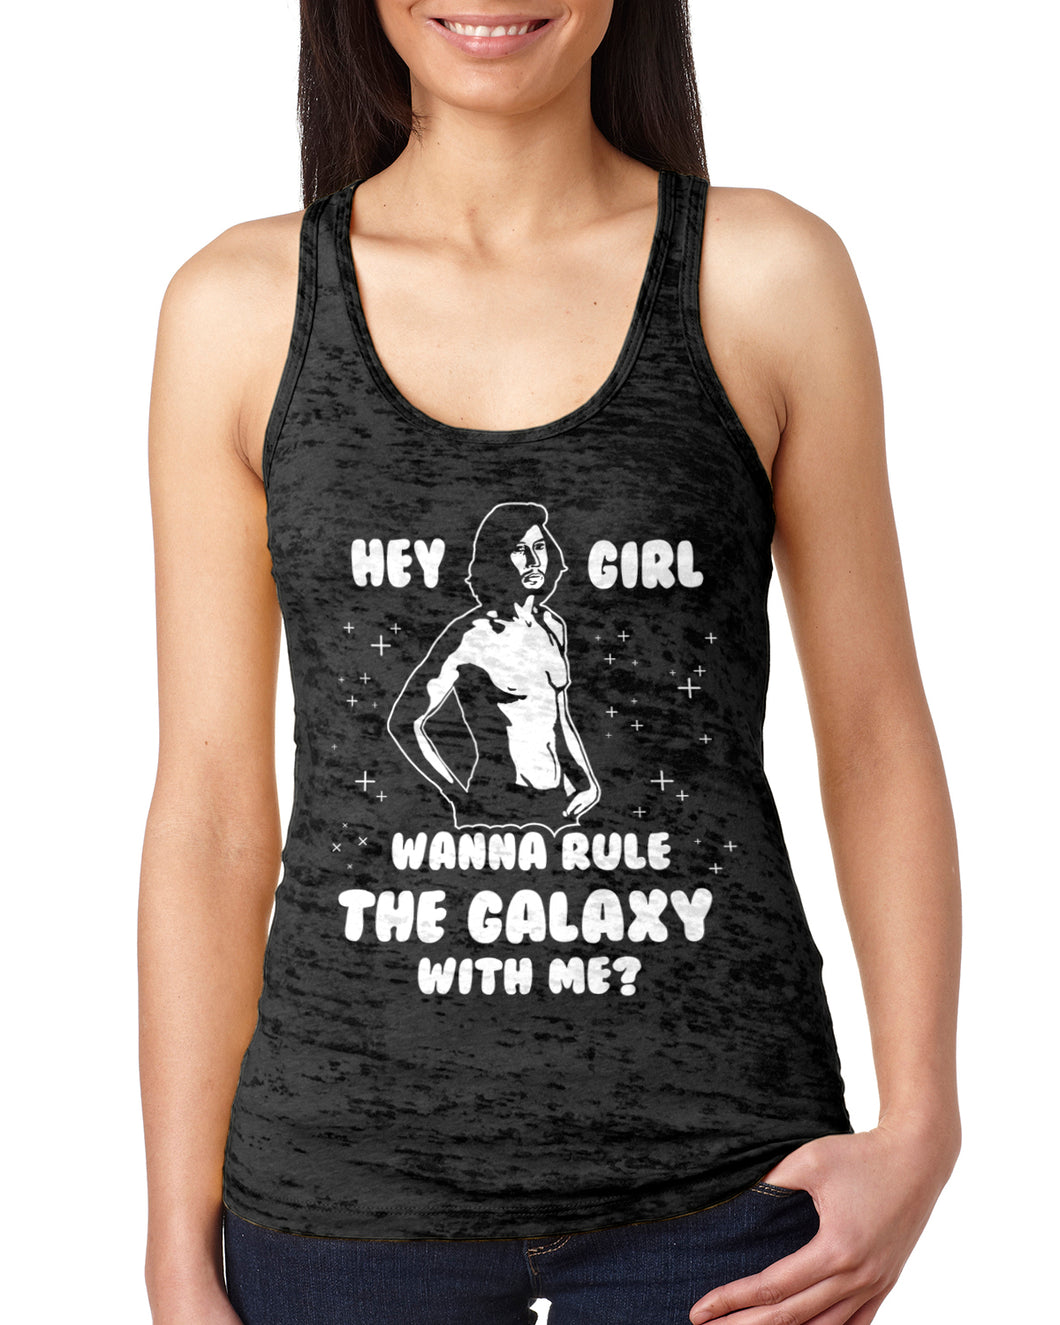 Hey Girl Wanna Rule The Galaxy With Me? Ladies Burnout Racer Tank Top